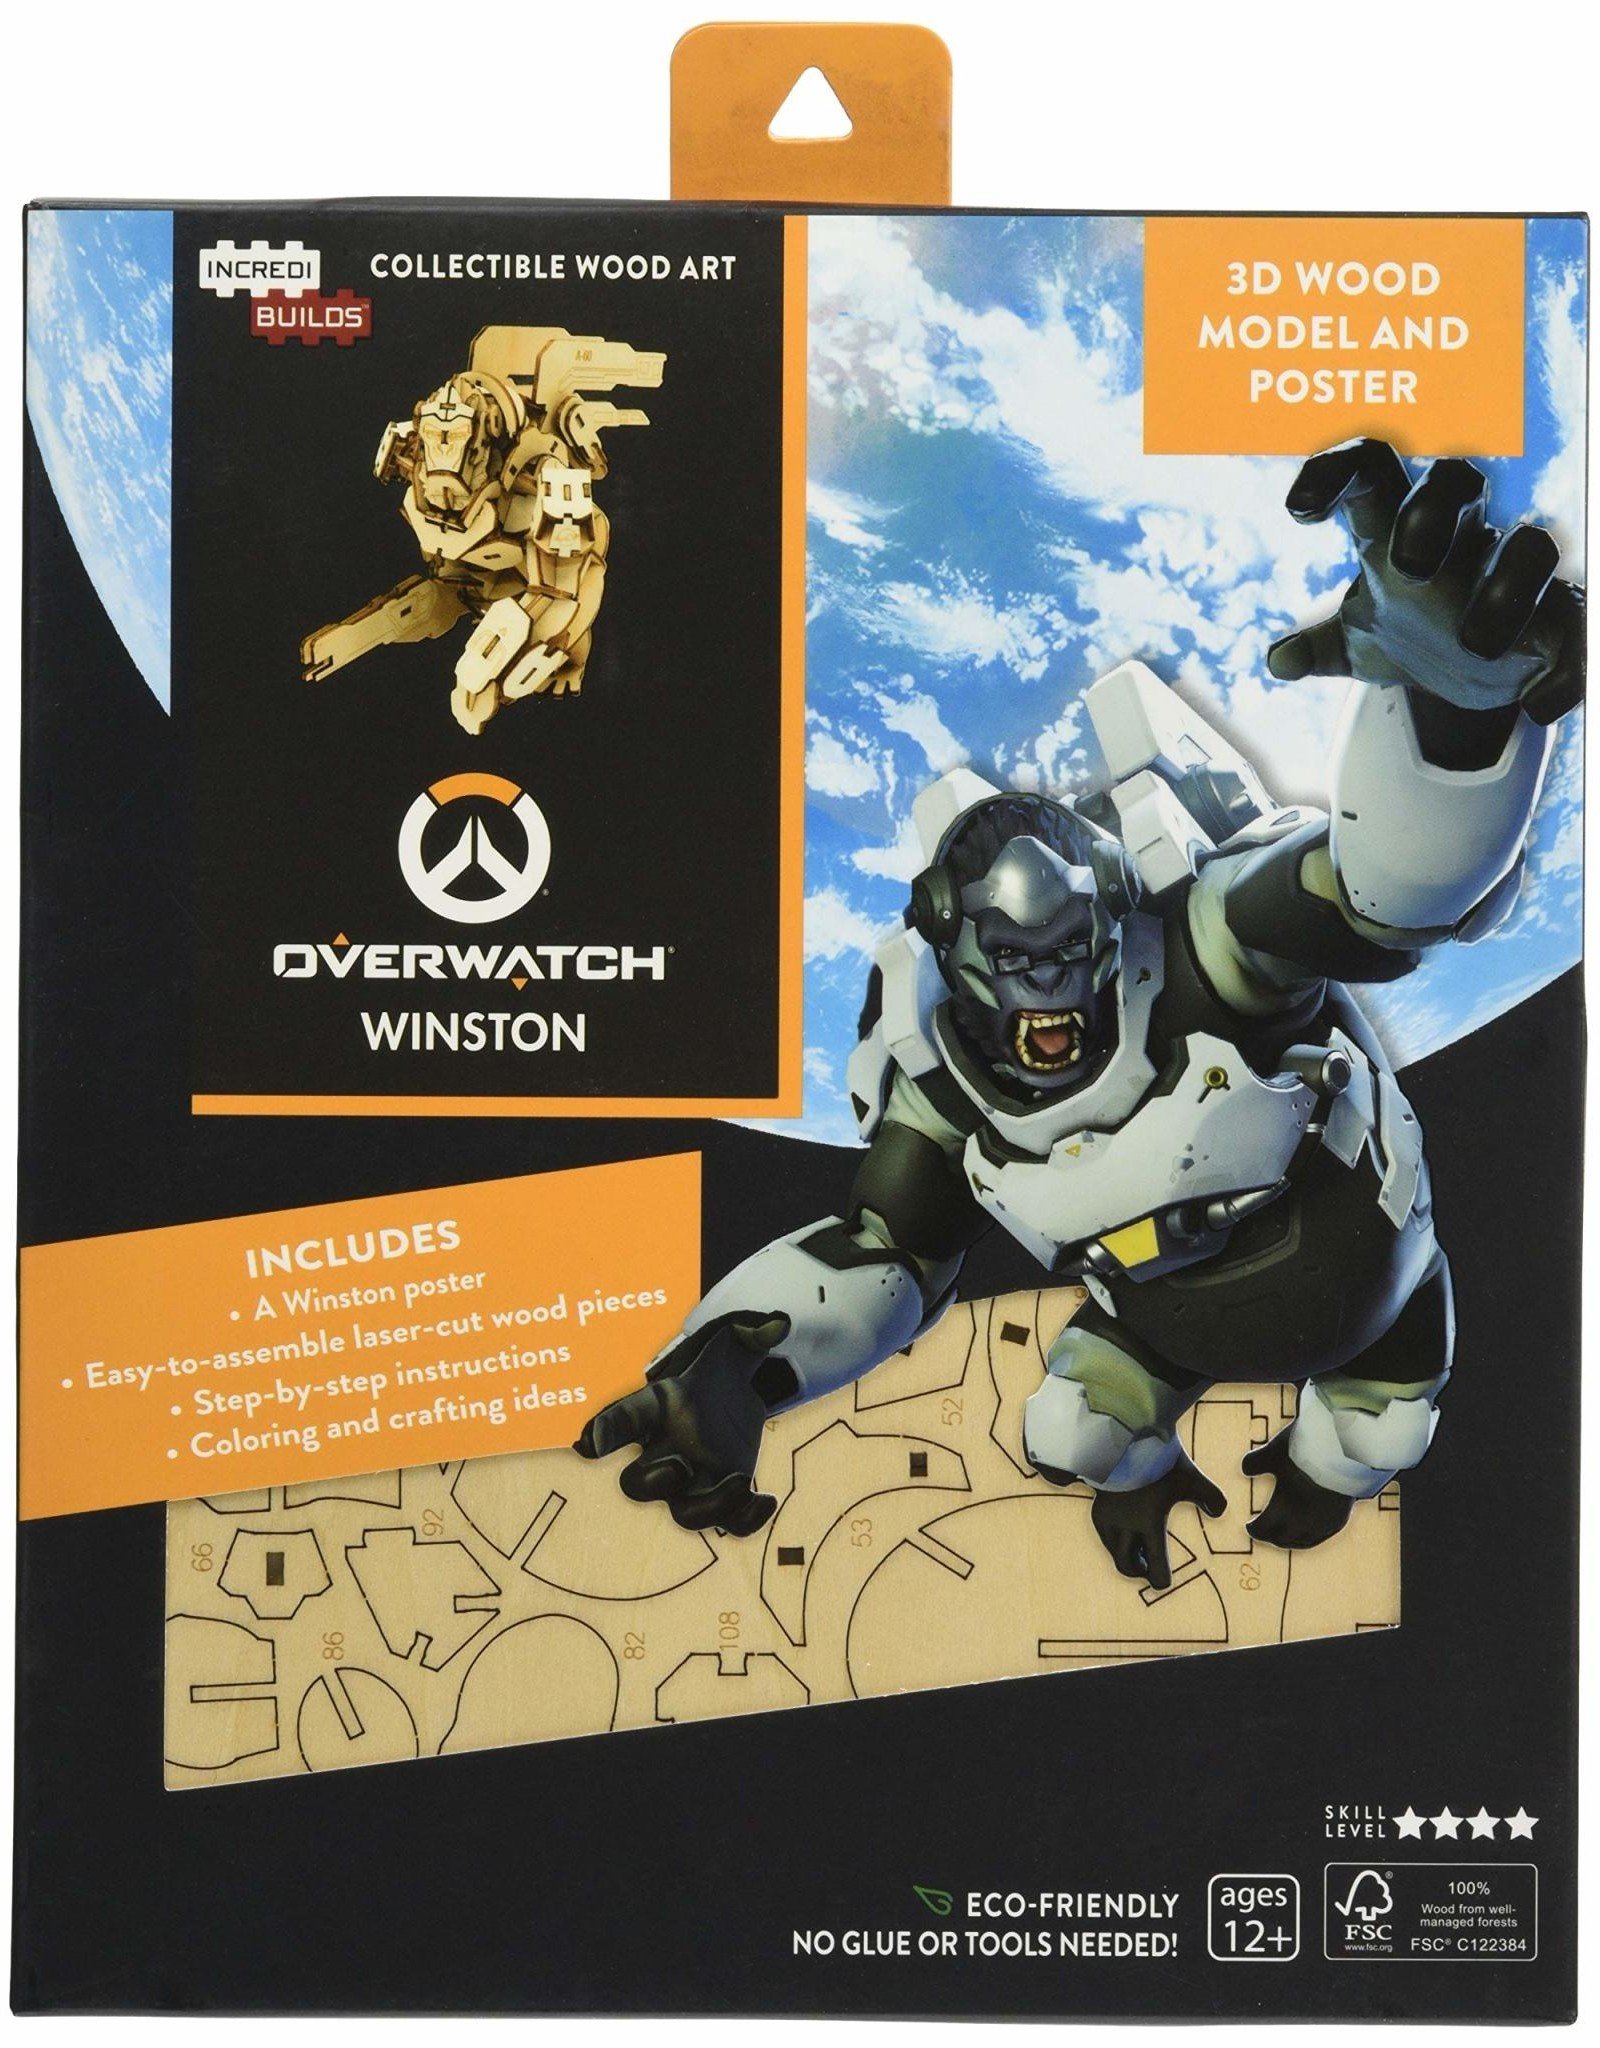 Collectible Wood Art: Overwatch Winston 3D Model and Poster